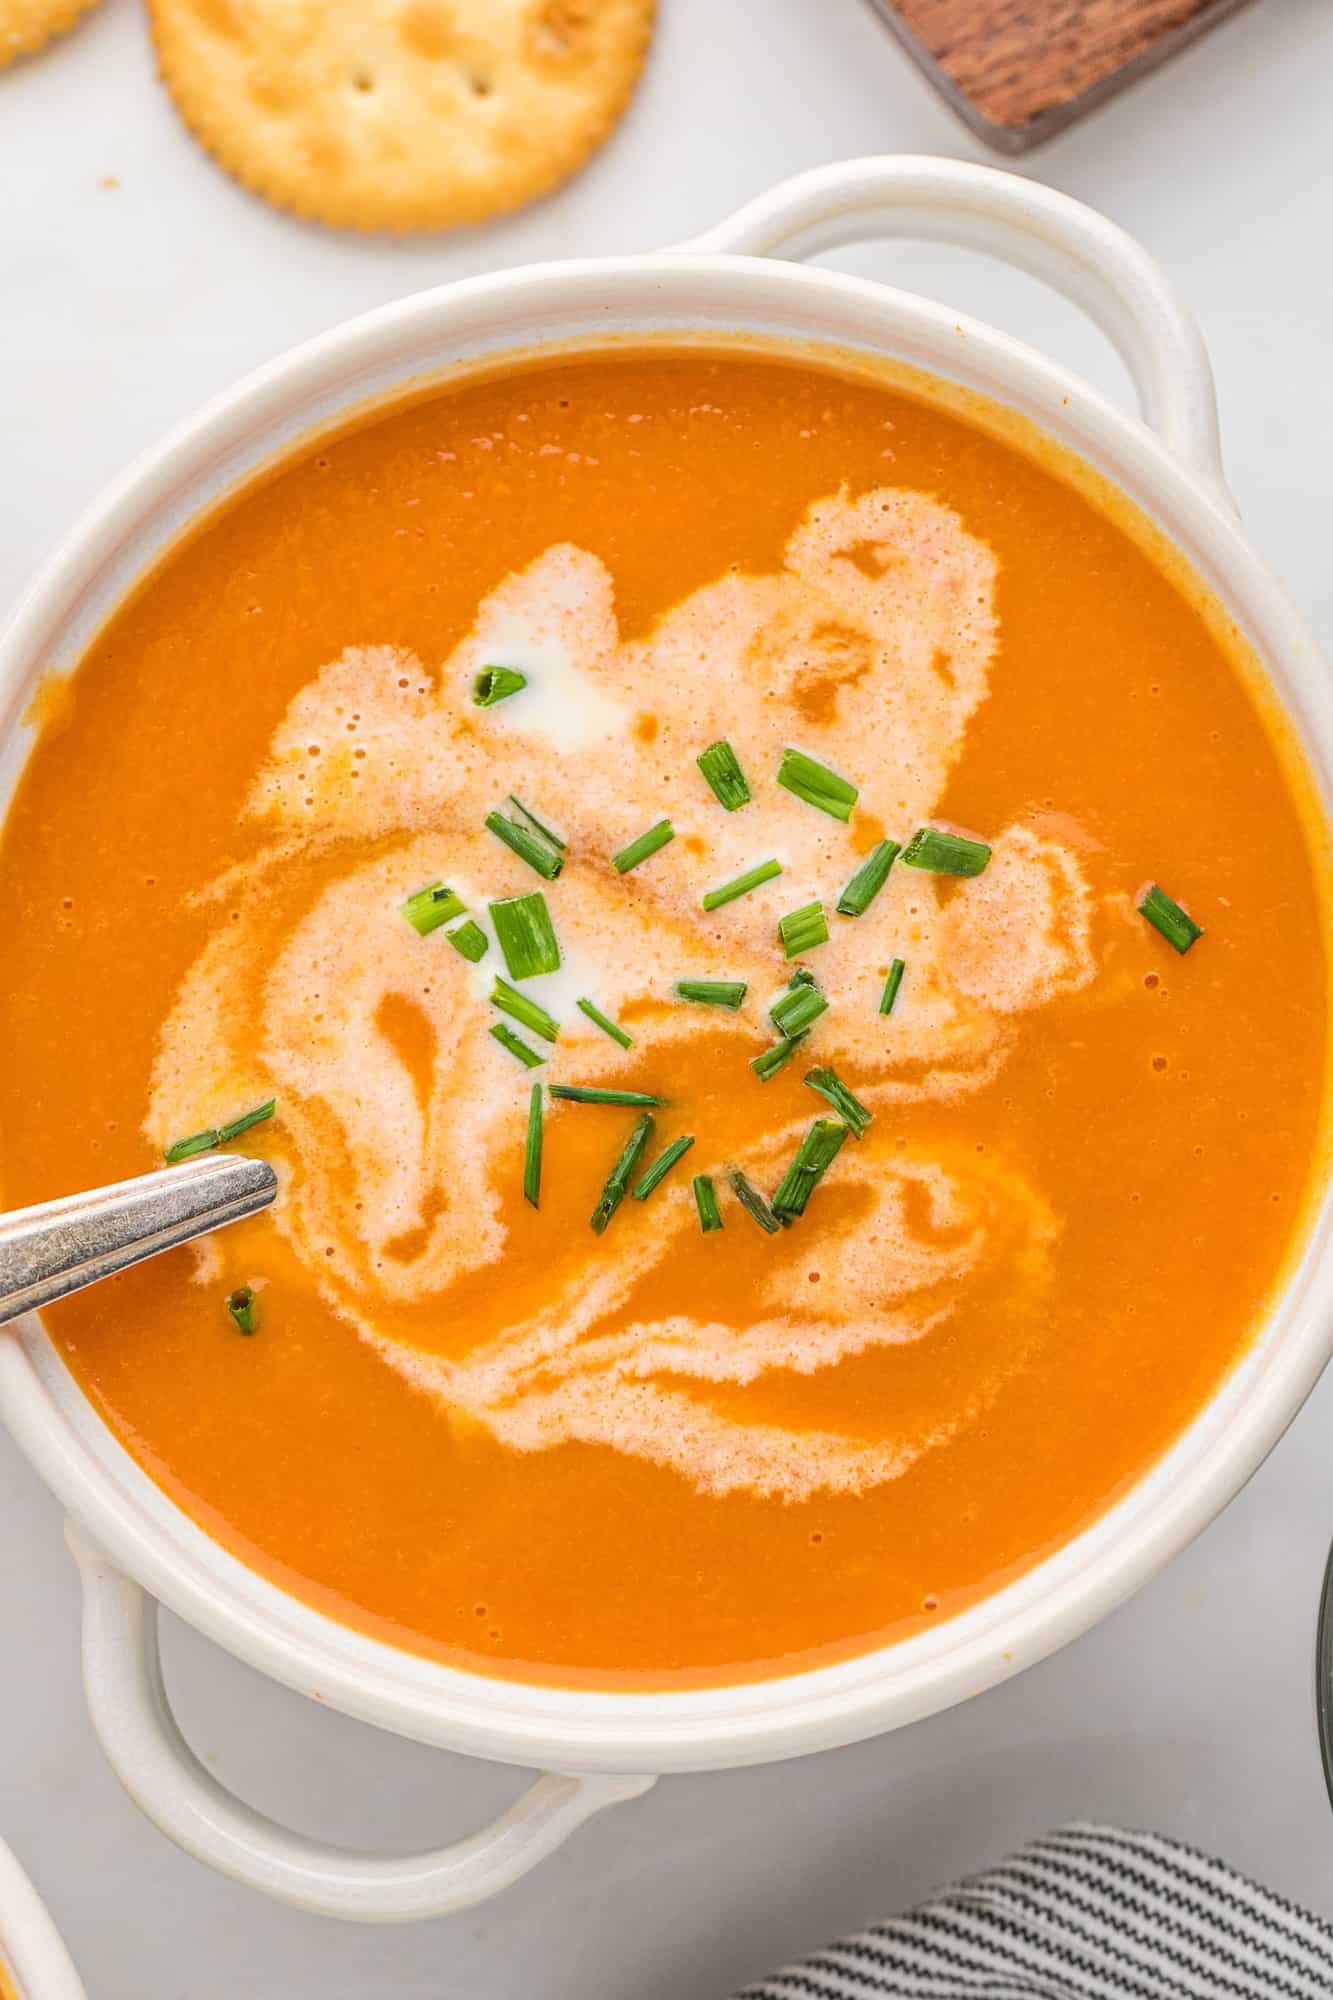 Creamy carrot soup swirled with cream and topped with chives.